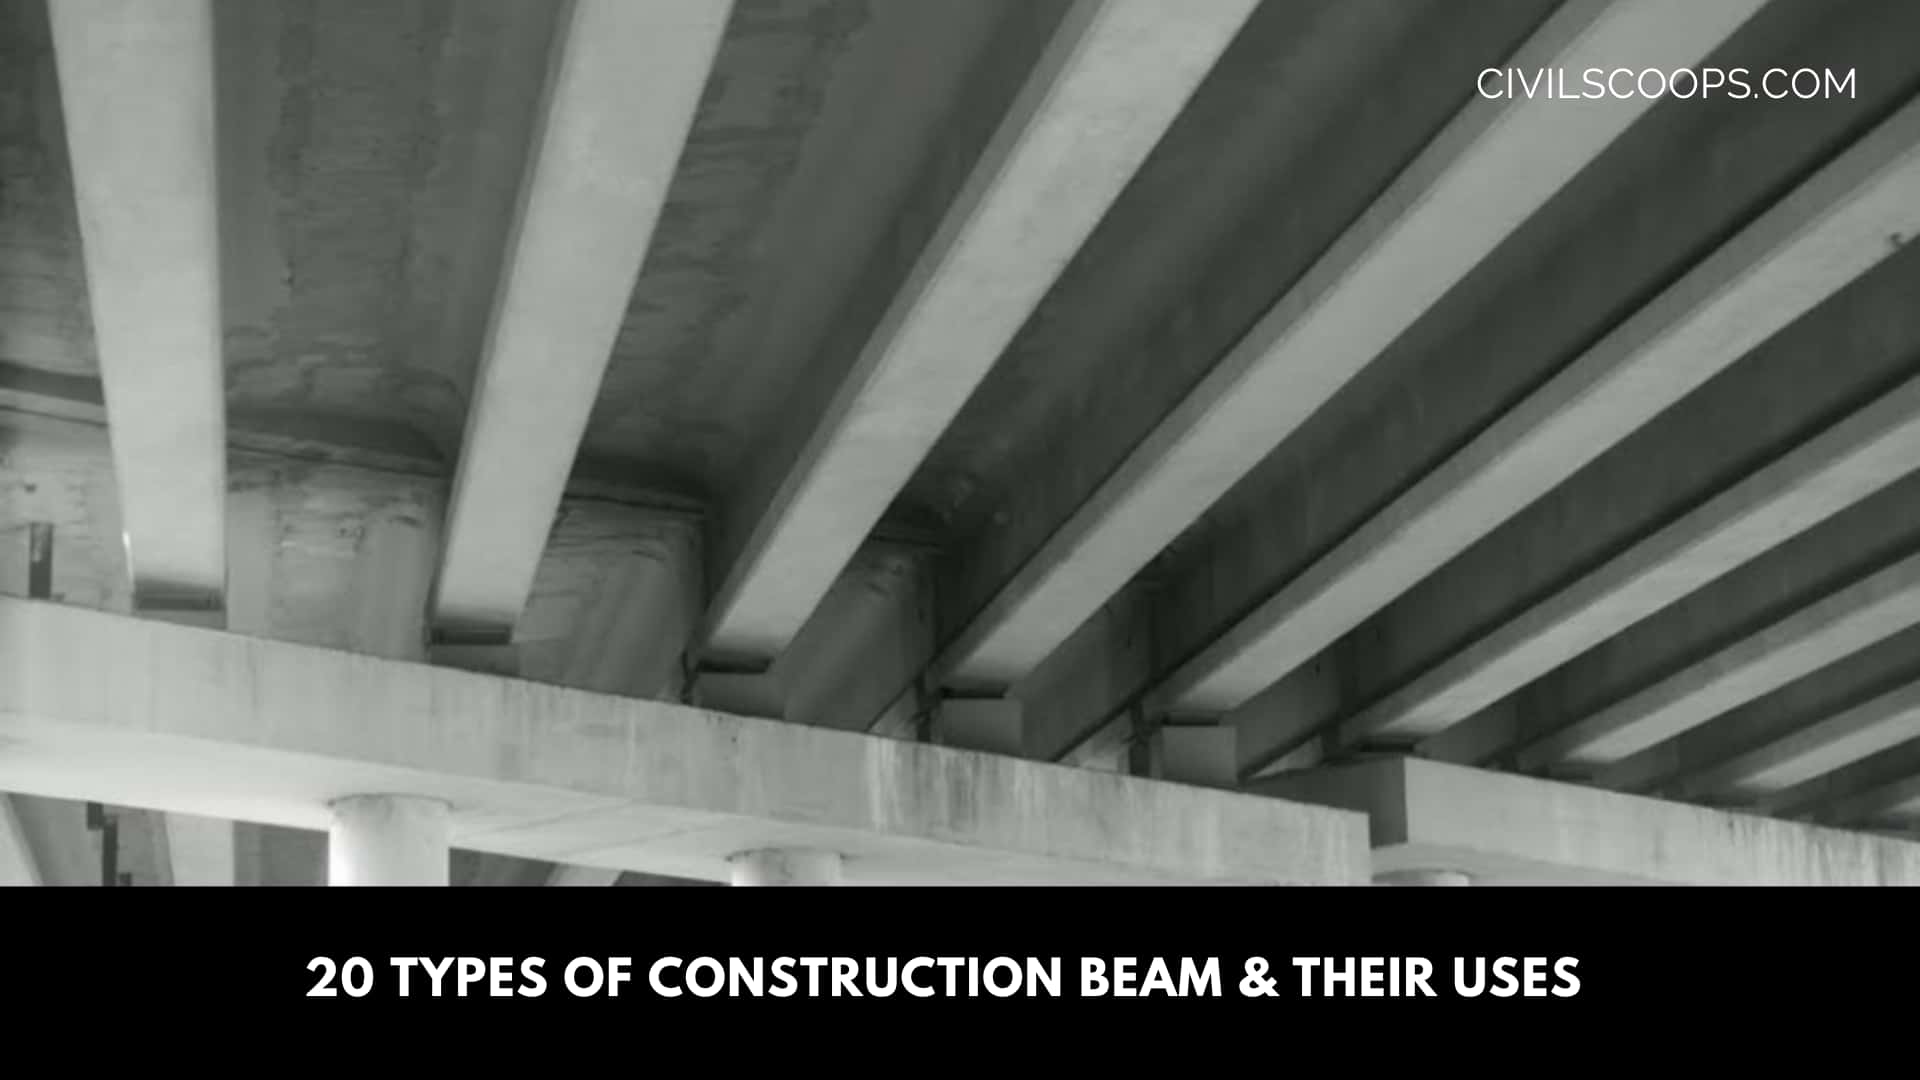 20 Types of Construction Beam & Their Uses